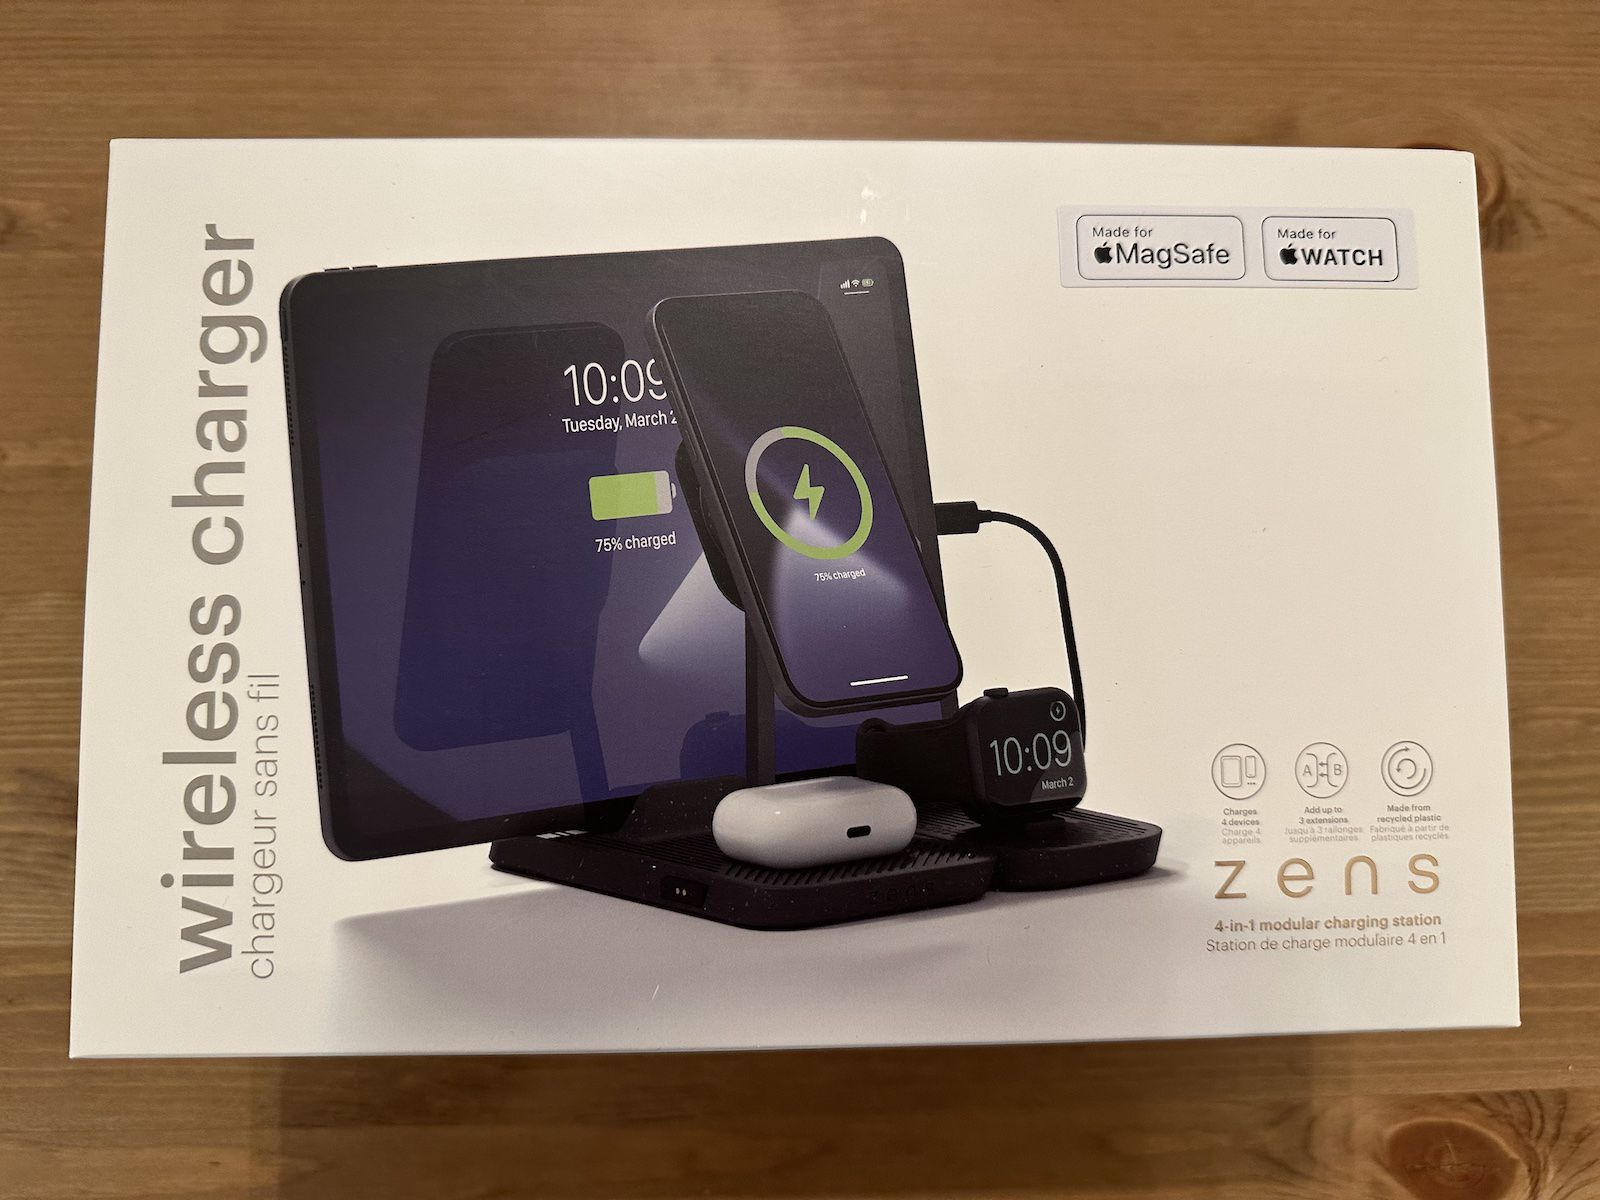 Hands-On With the Zens 4-in-1 MagSafe Charging Station for iPhone, iPad, Apple W..